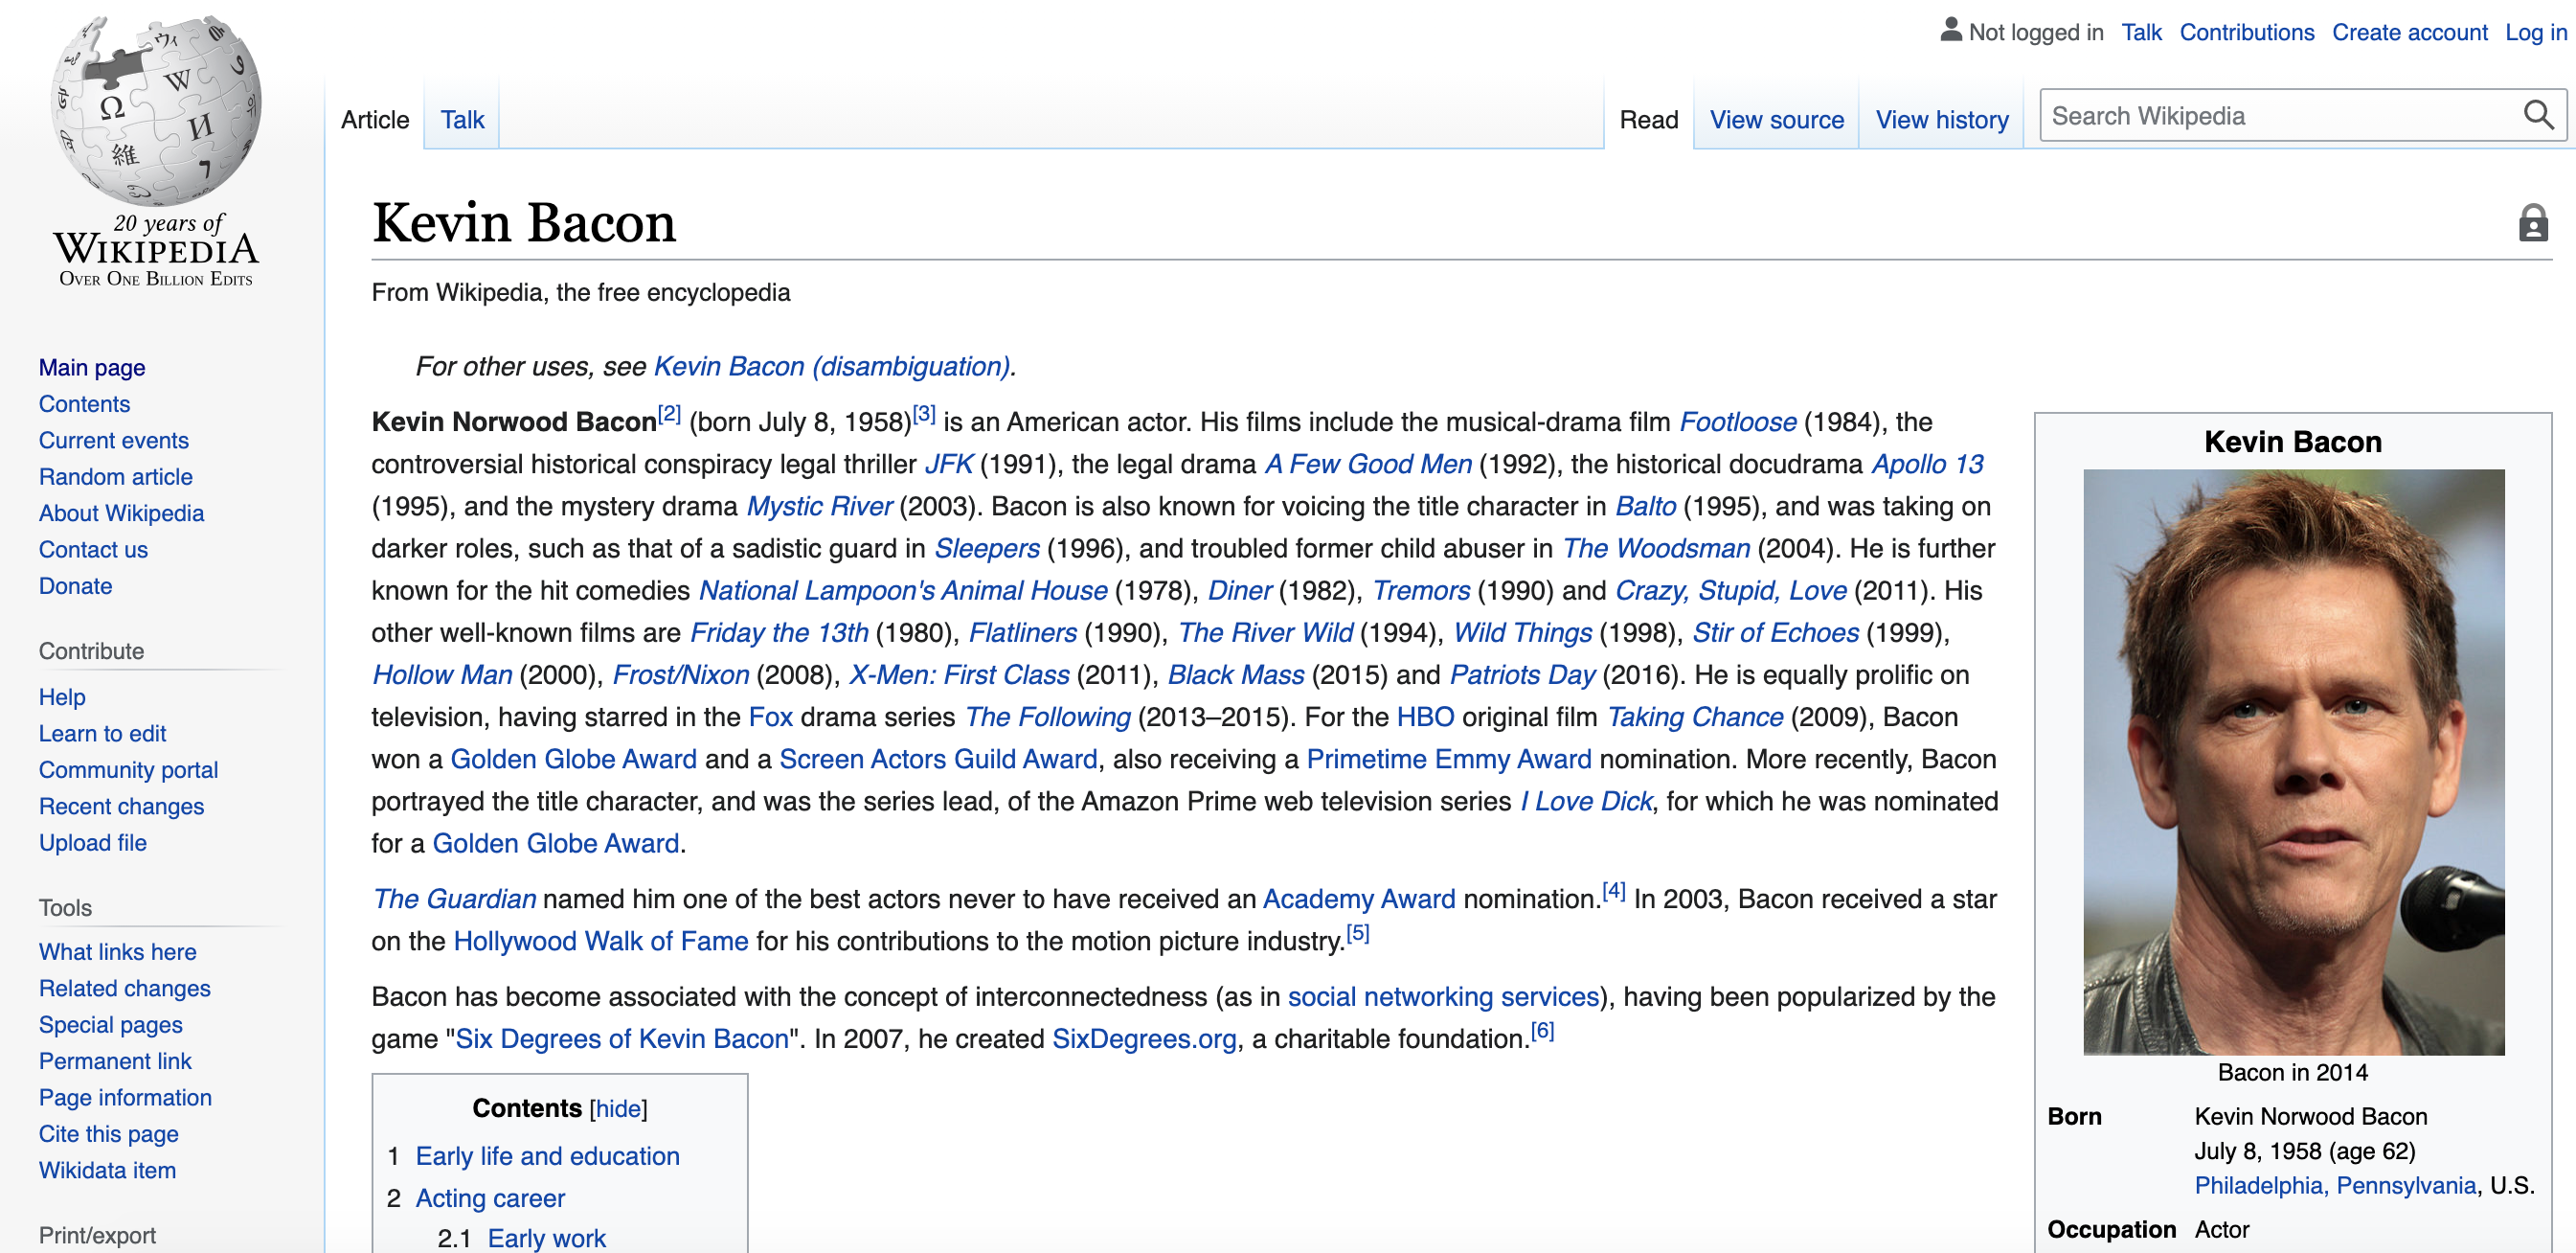 The Wikipedia page for Kevin Bacon